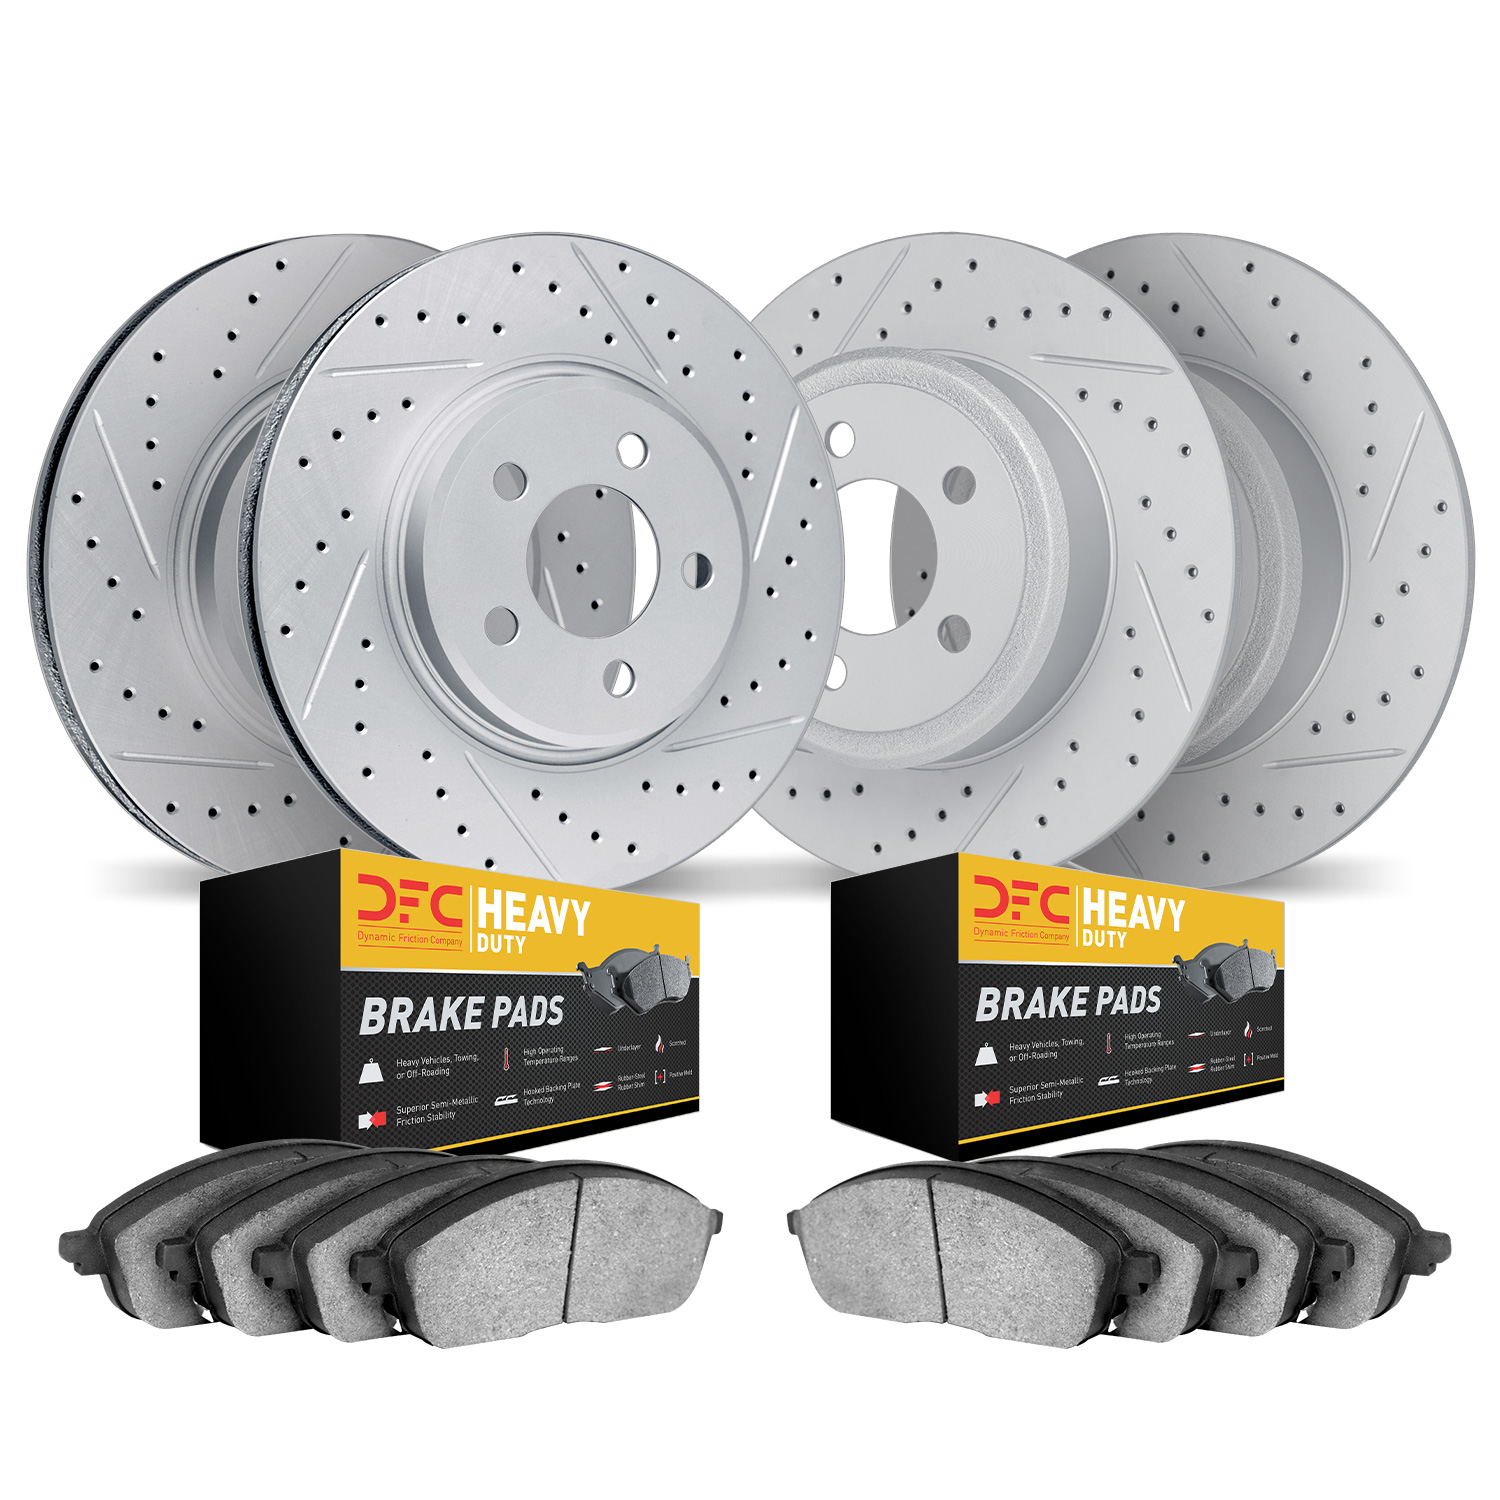 2204-99105 Geoperformance Drilled/Slotted Rotors w/Heavy-Duty Pads Kit, 2020-2020 Ford/Lincoln/Mercury/Mazda, Position: Front an